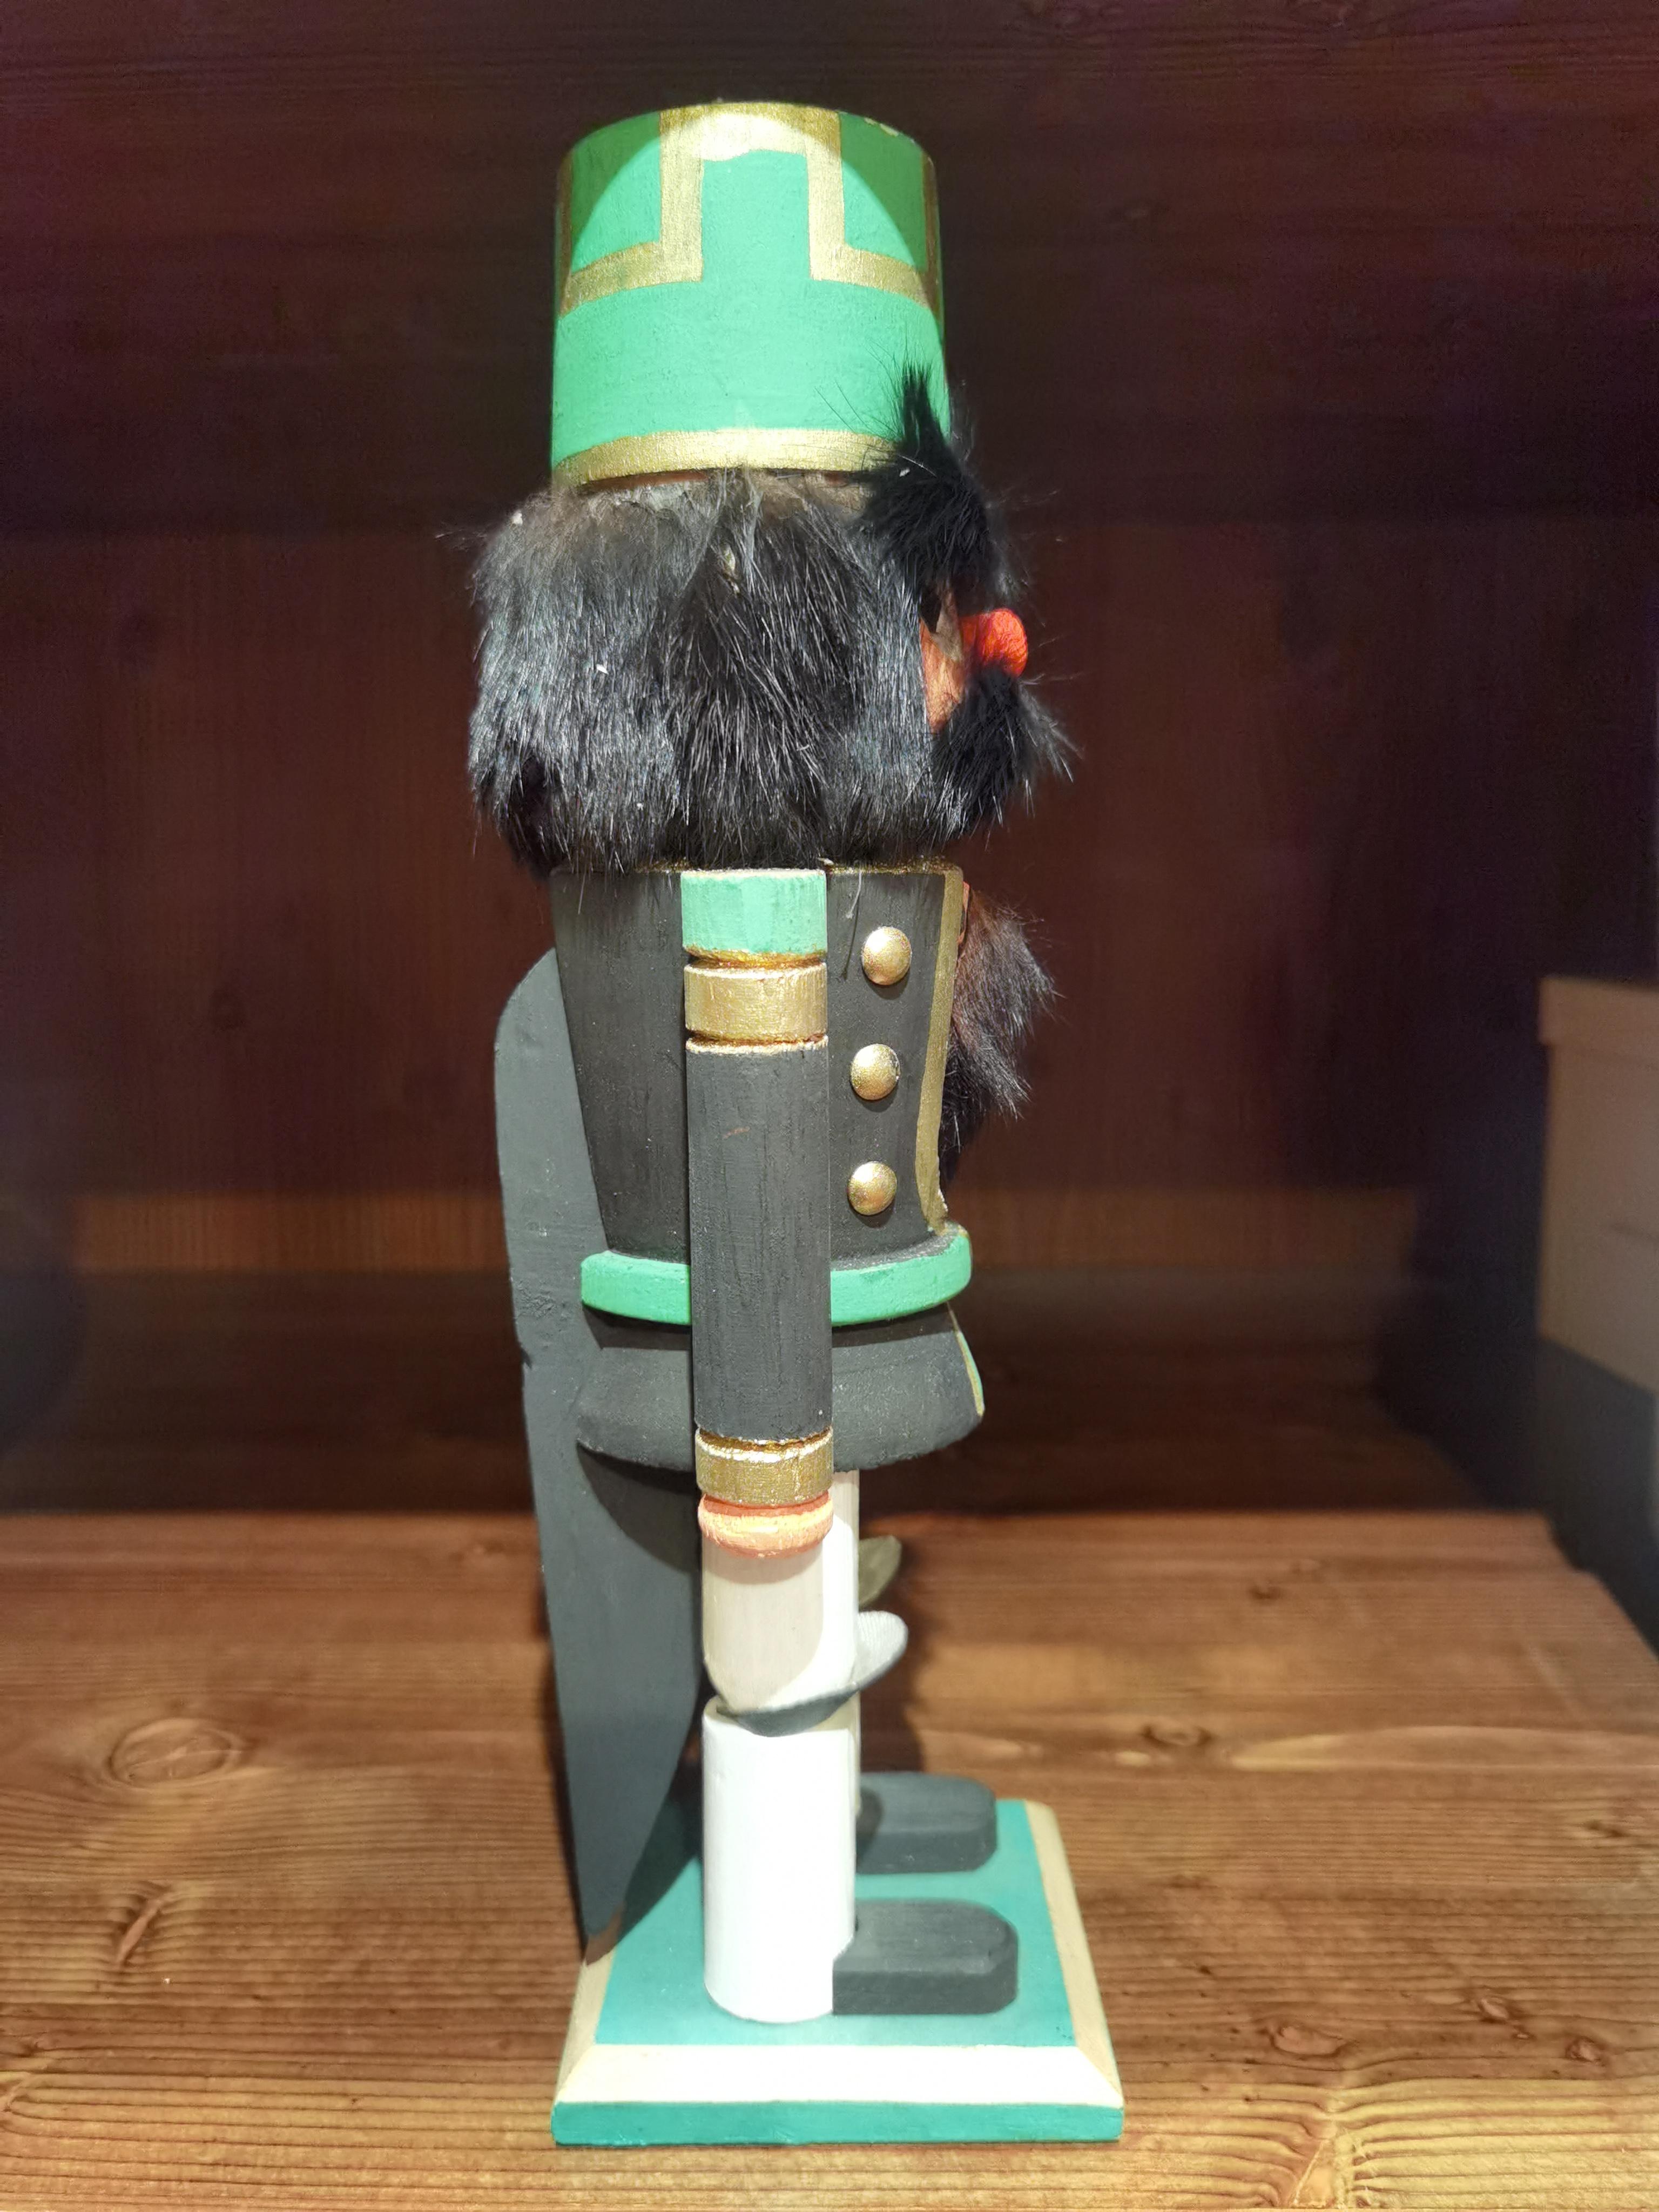 Vintage wooden nutcracker figure from the Erzgebirge. The region Erzgebirge formerly Eastern Germany is famous for this special kind of nutcrackers, where intricate carving has been their home. Completely hand-painted in green and black colors and